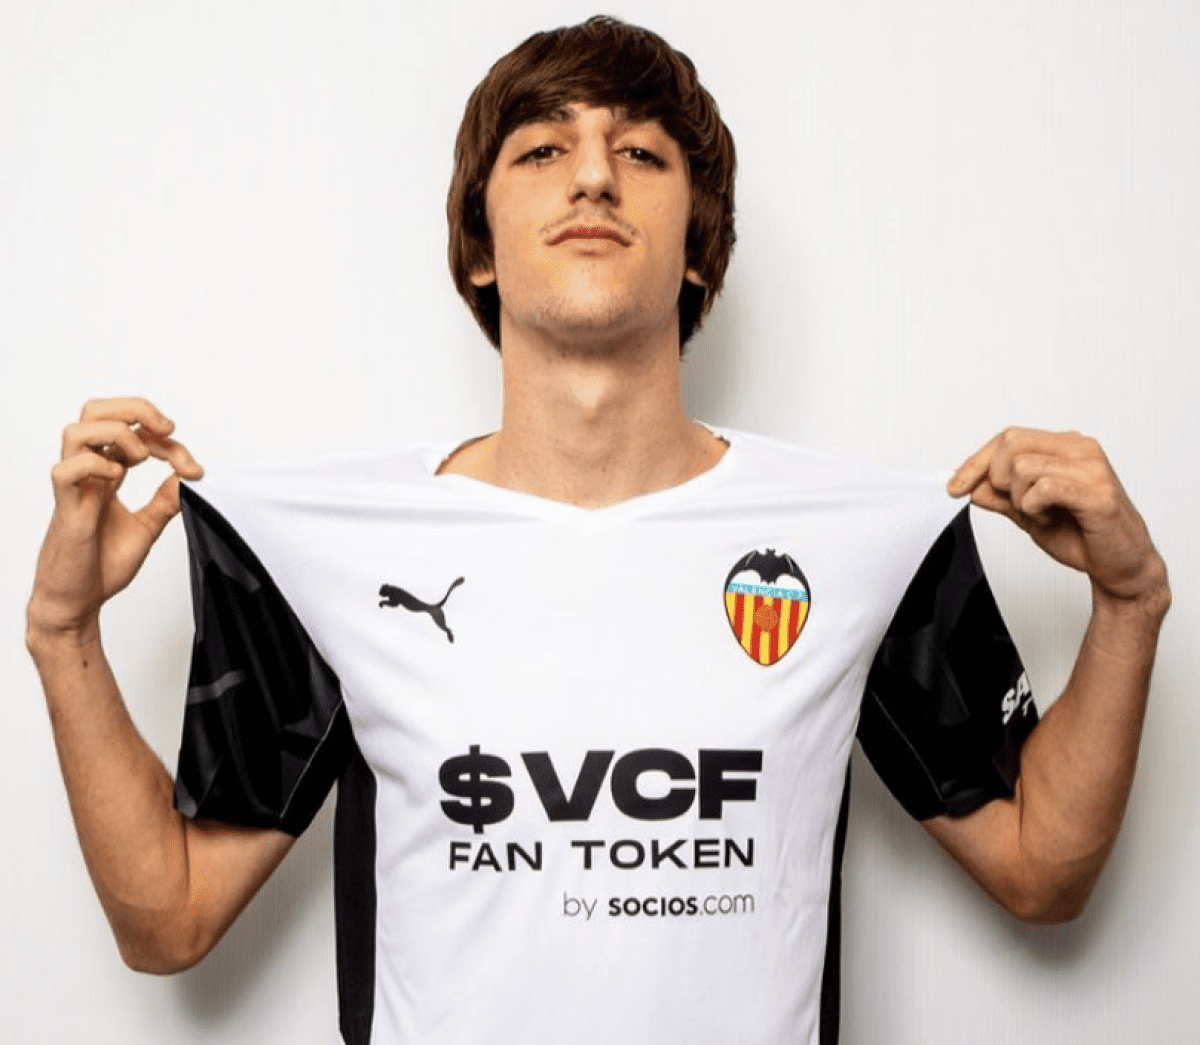 Valencia's only option with Bryan Gil forces a painful sale
